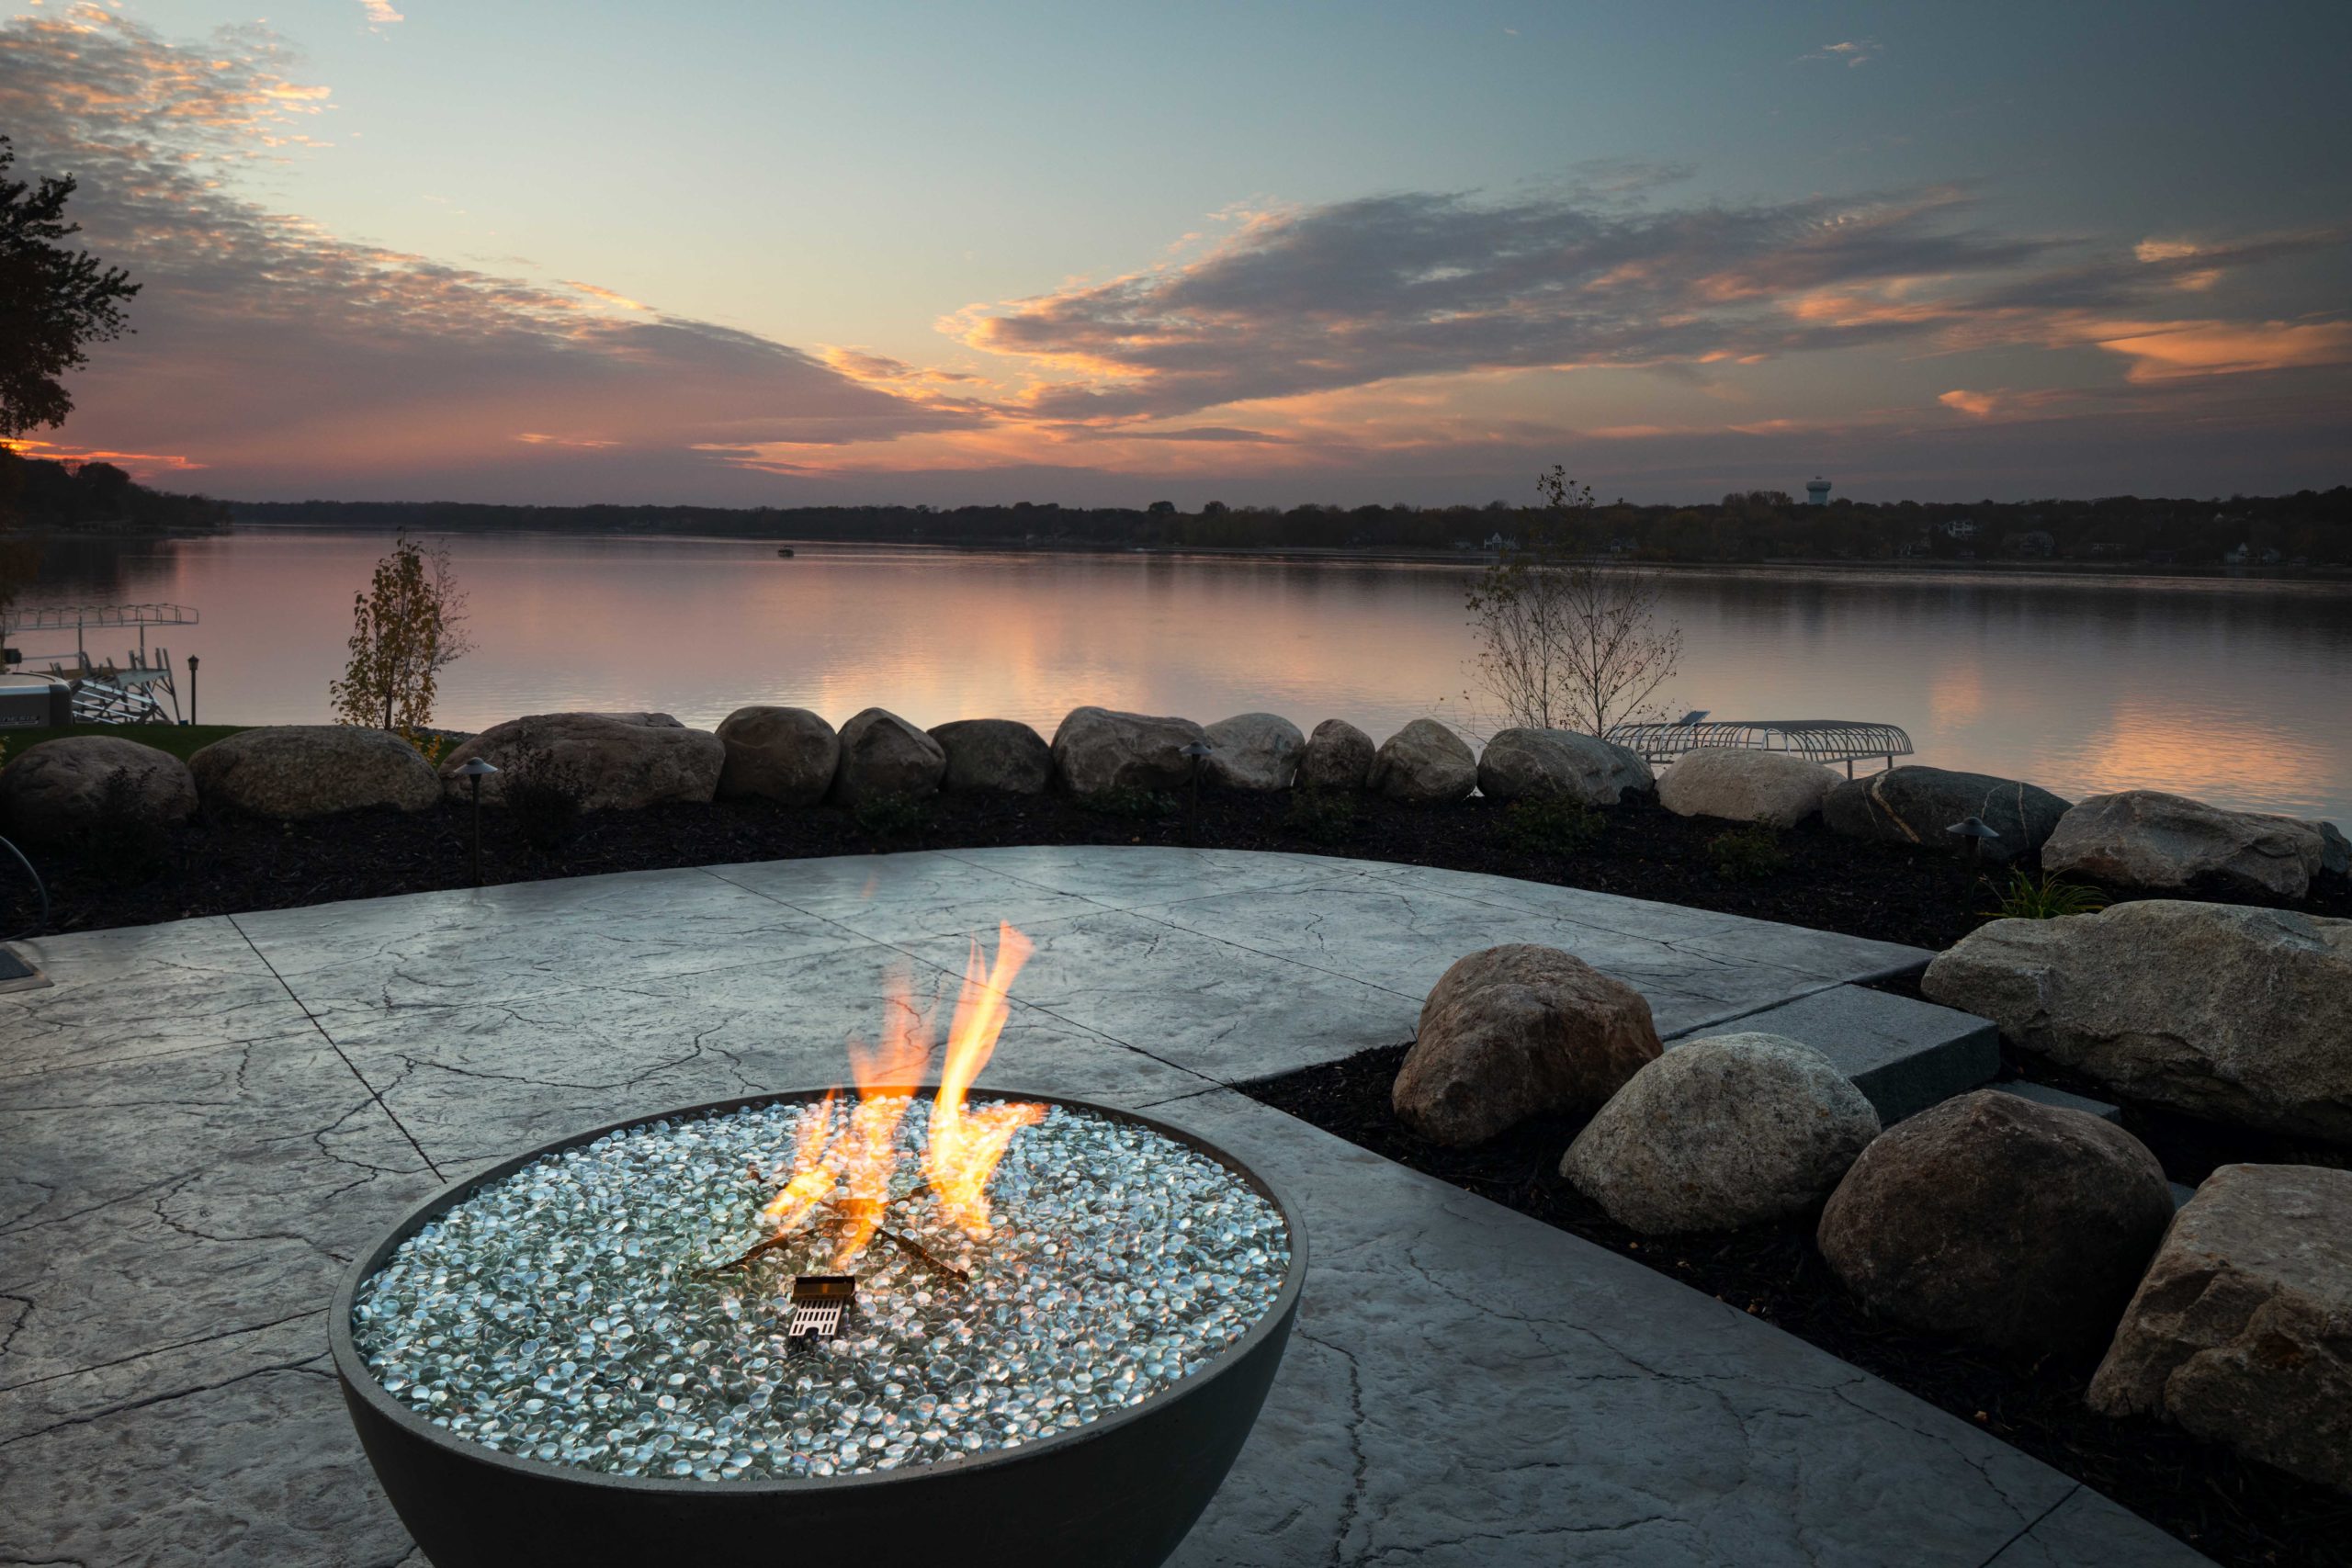 A fire pit in the middle of a lake.